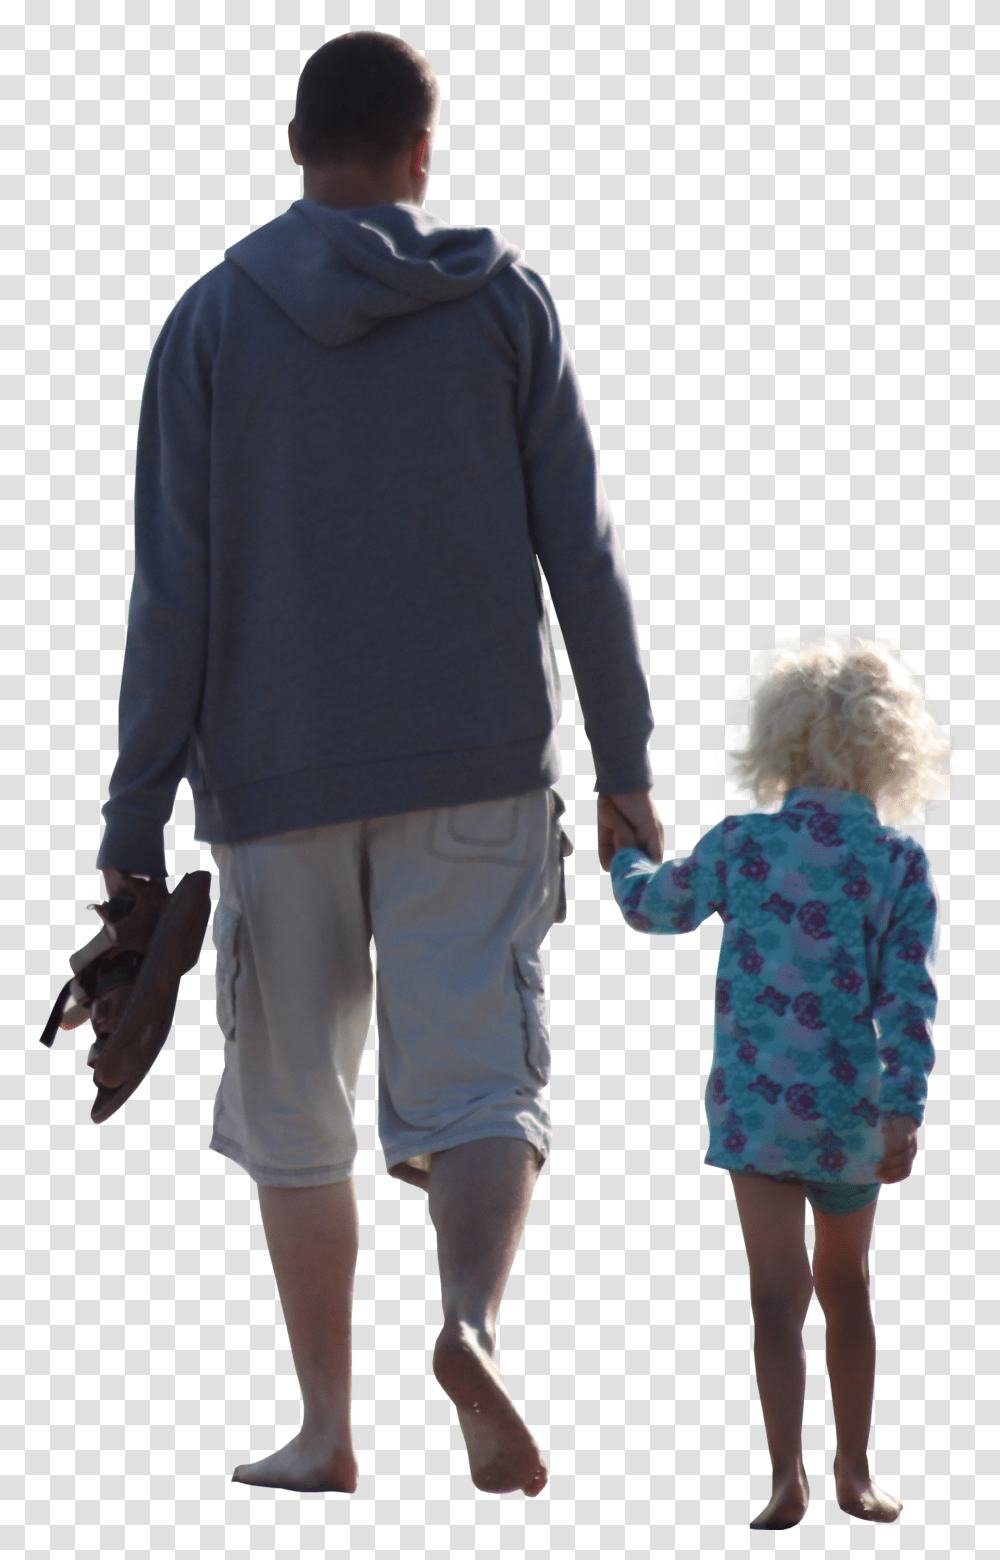 Children Walking Dear Dad I May Find A Prince, Apparel, Hand, Holding Hands Transparent Png